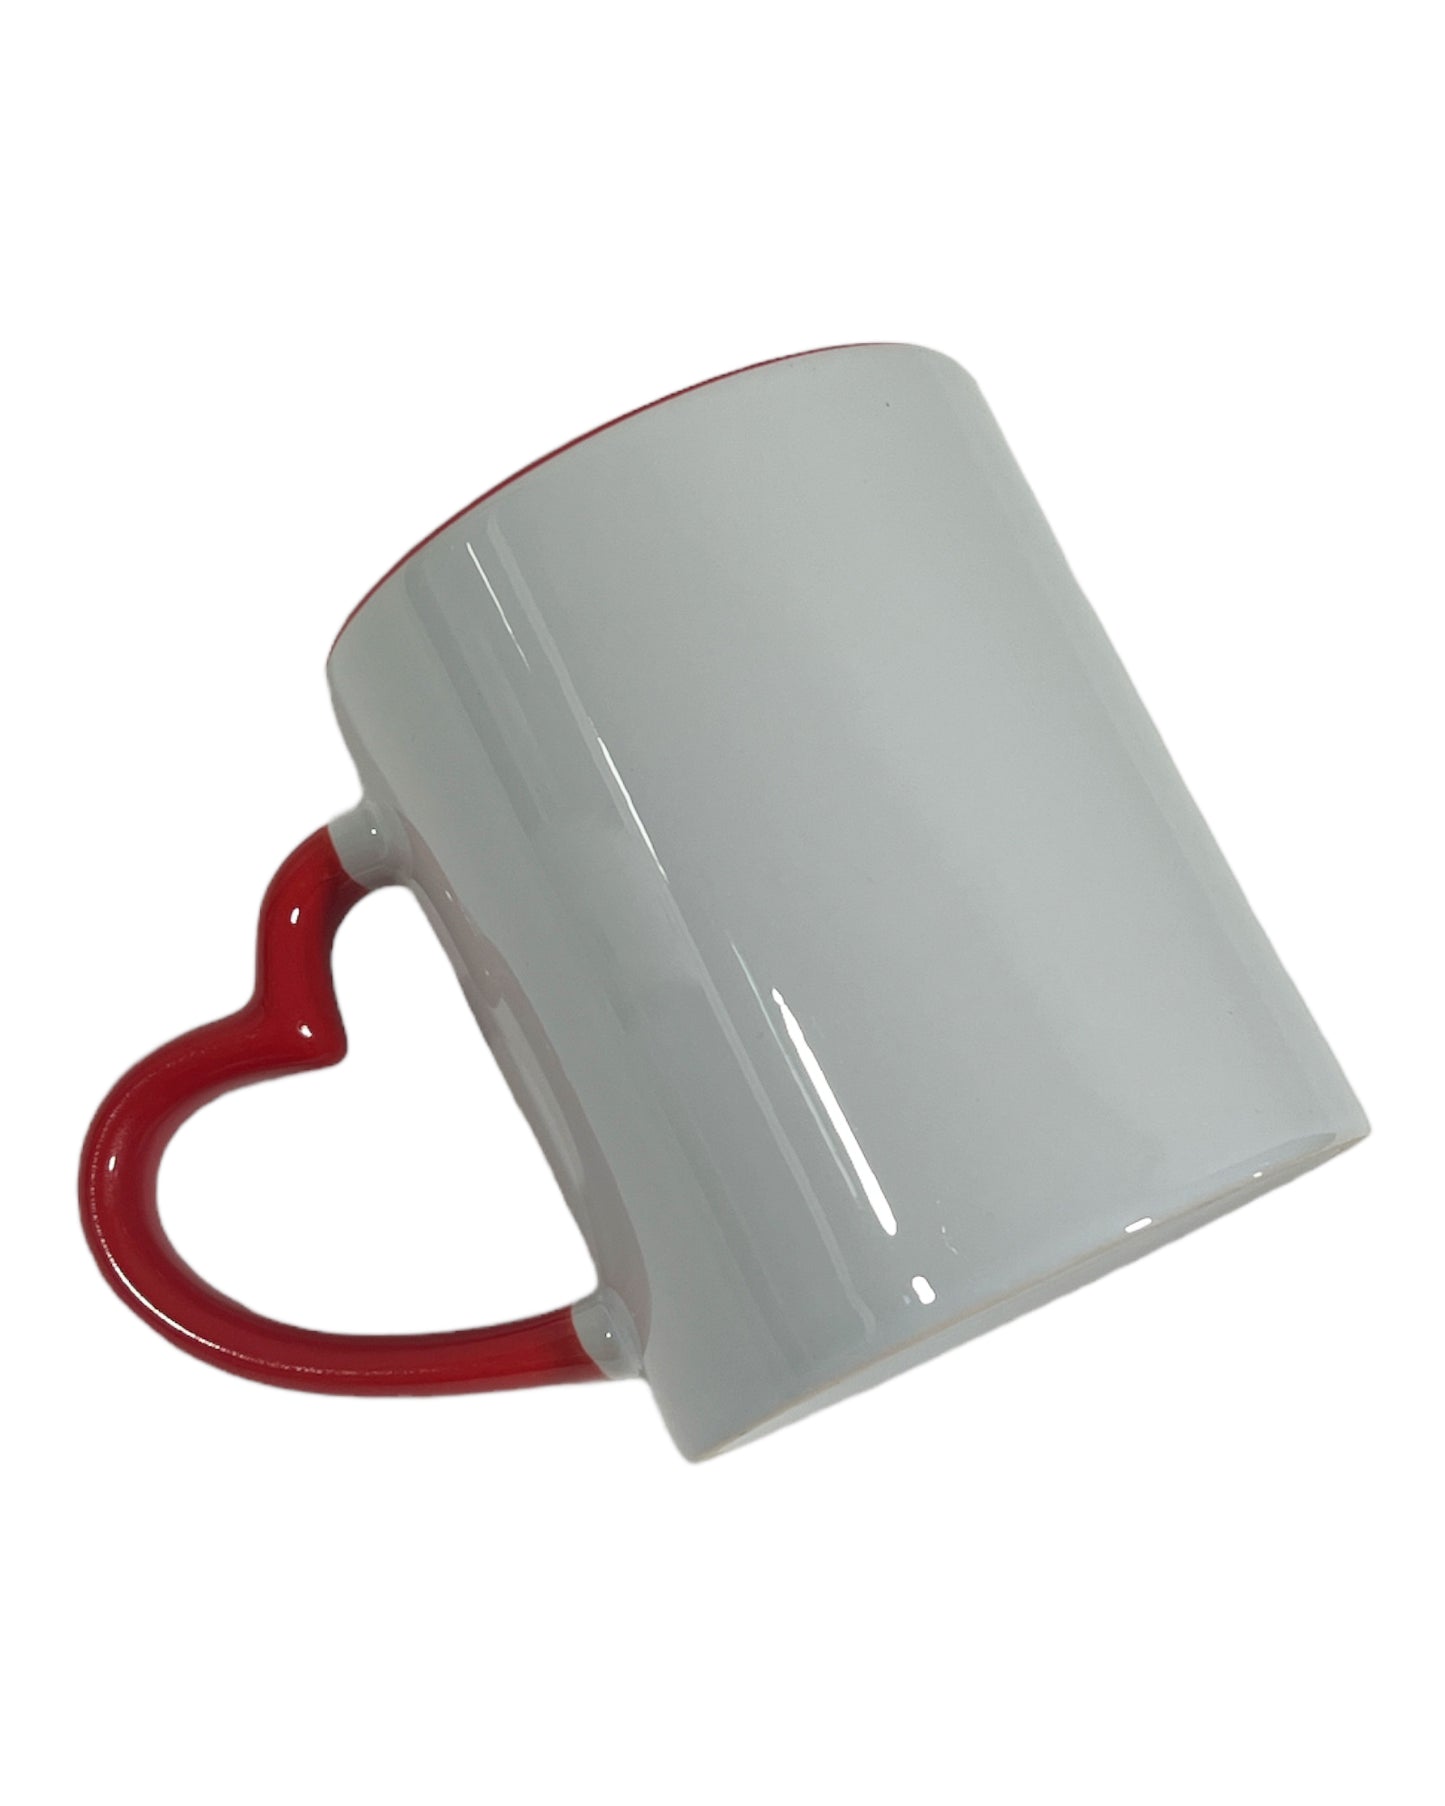 Ceramic mug with heart handle in red